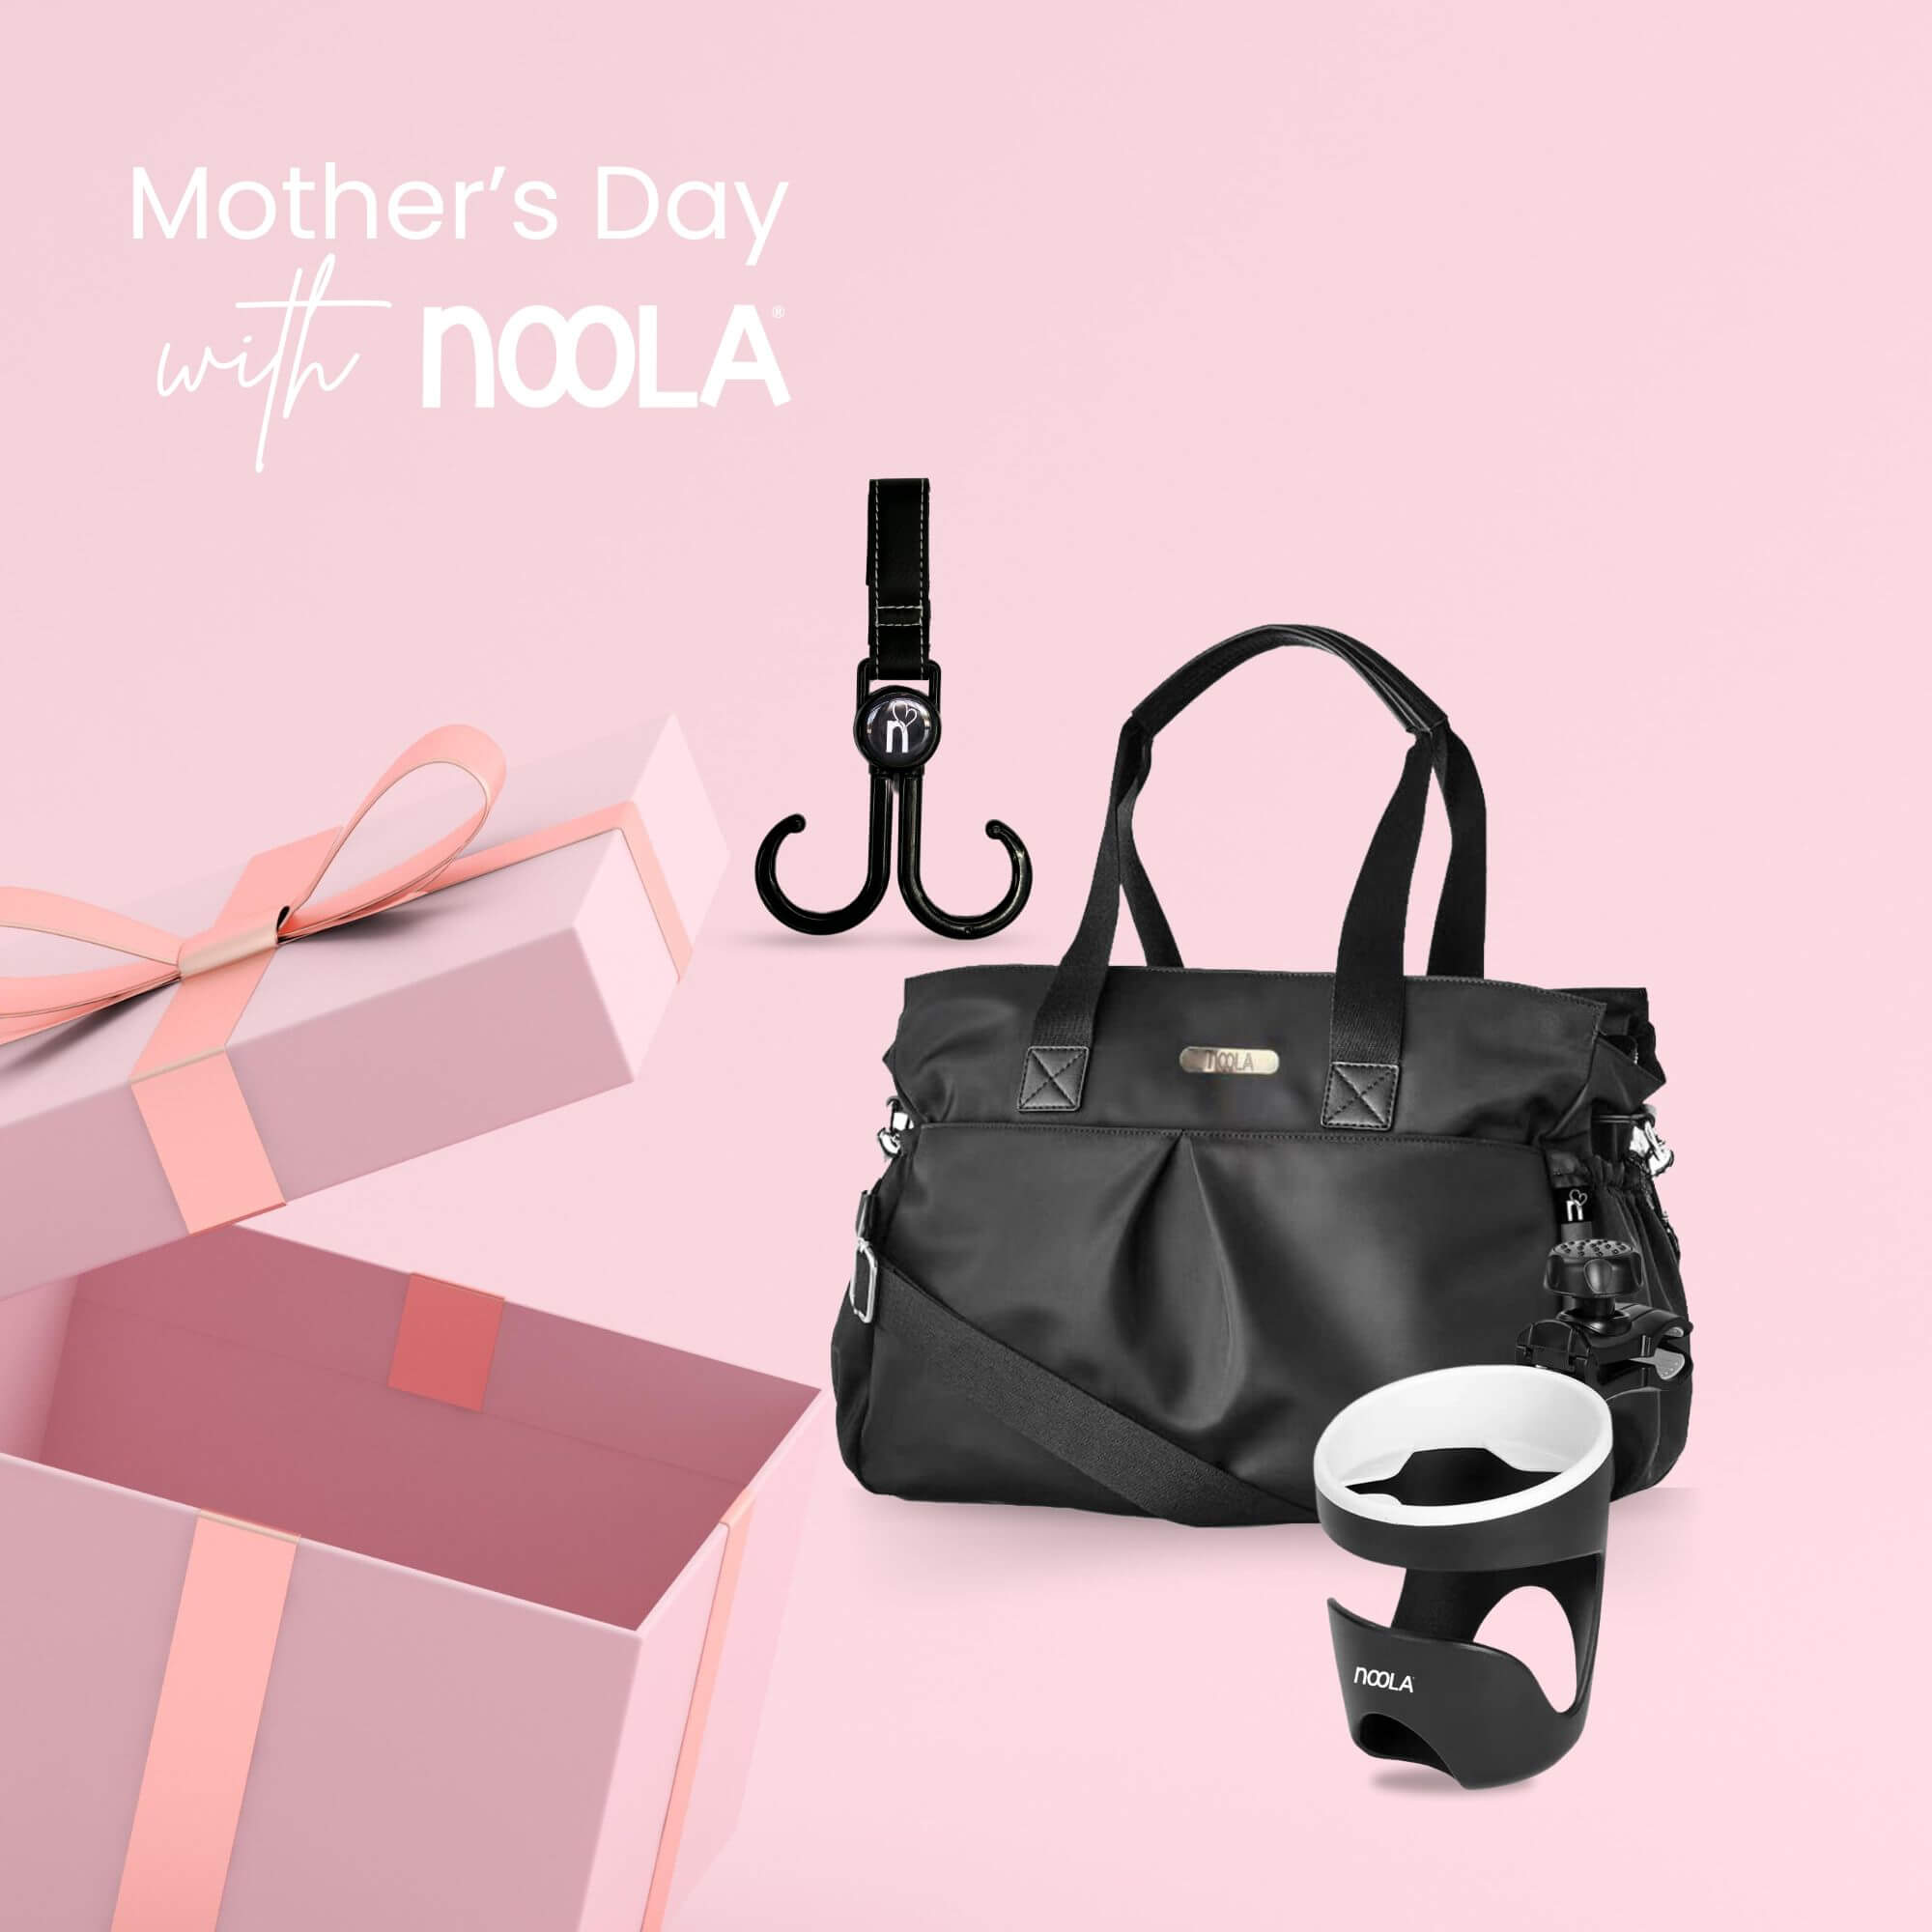 noola mothersday gift box bundle diaper bag black with stroller accessories